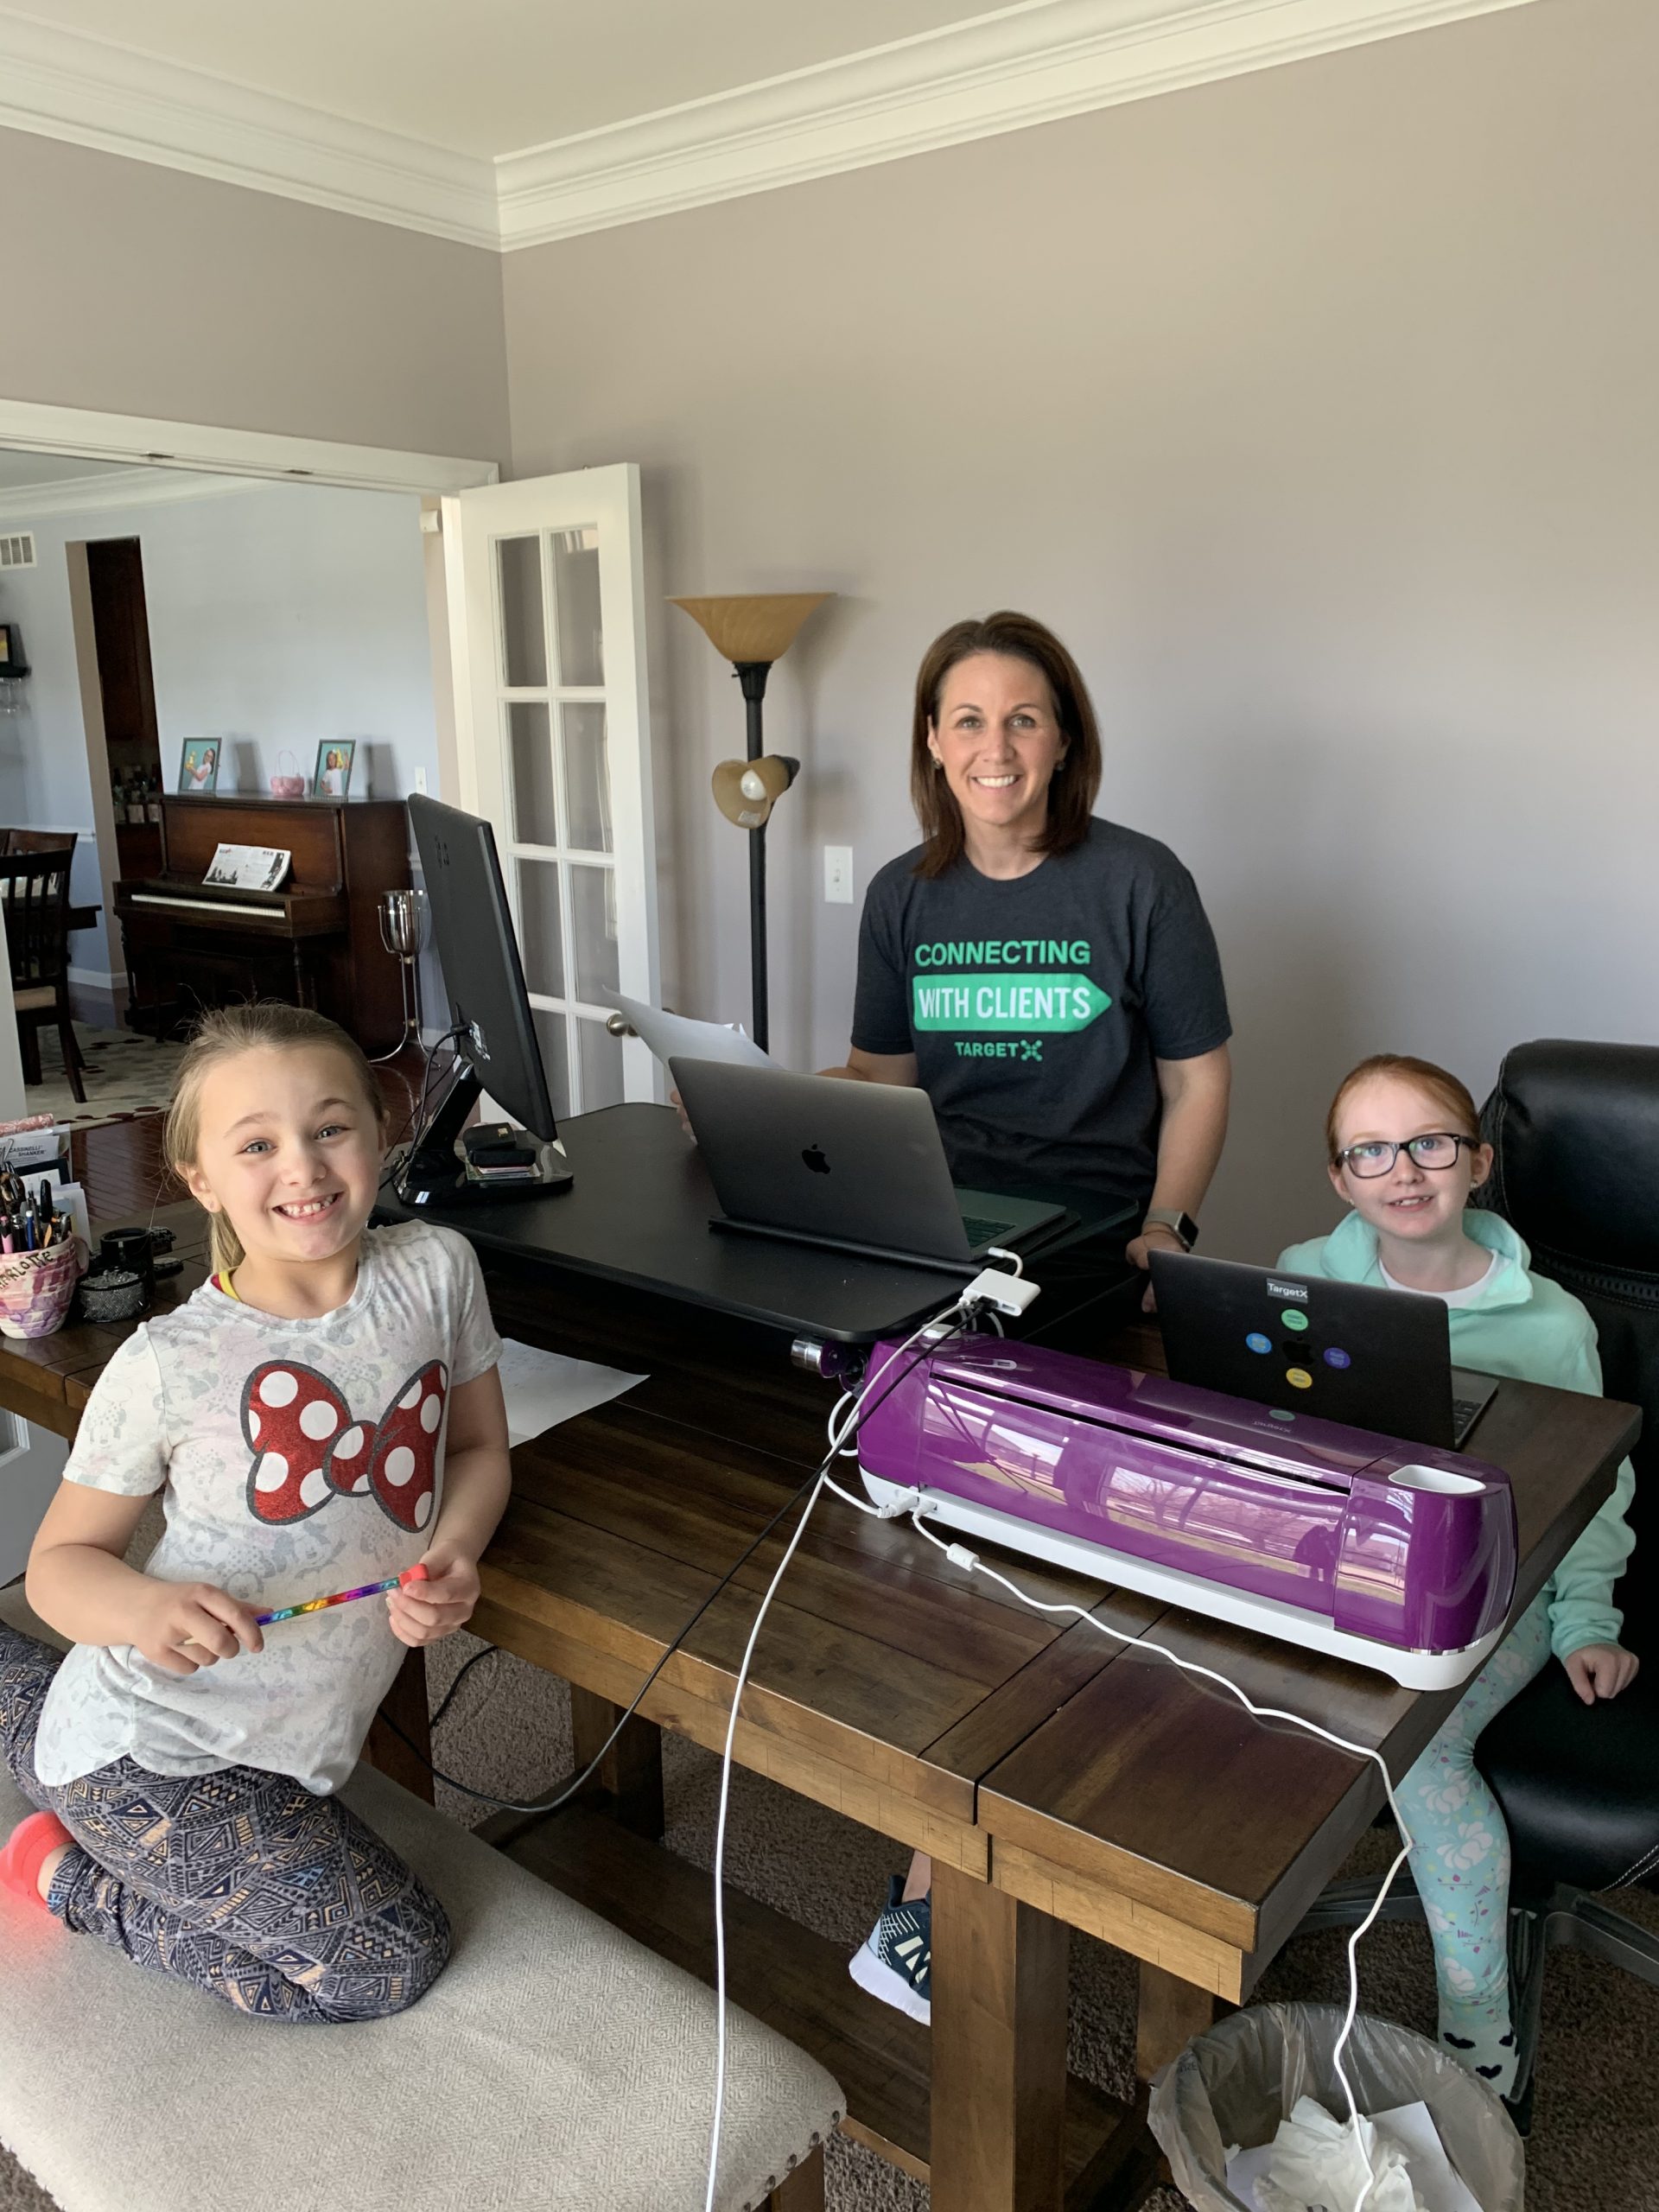 A Busy Mom Shares Her Perspective On Working From Home